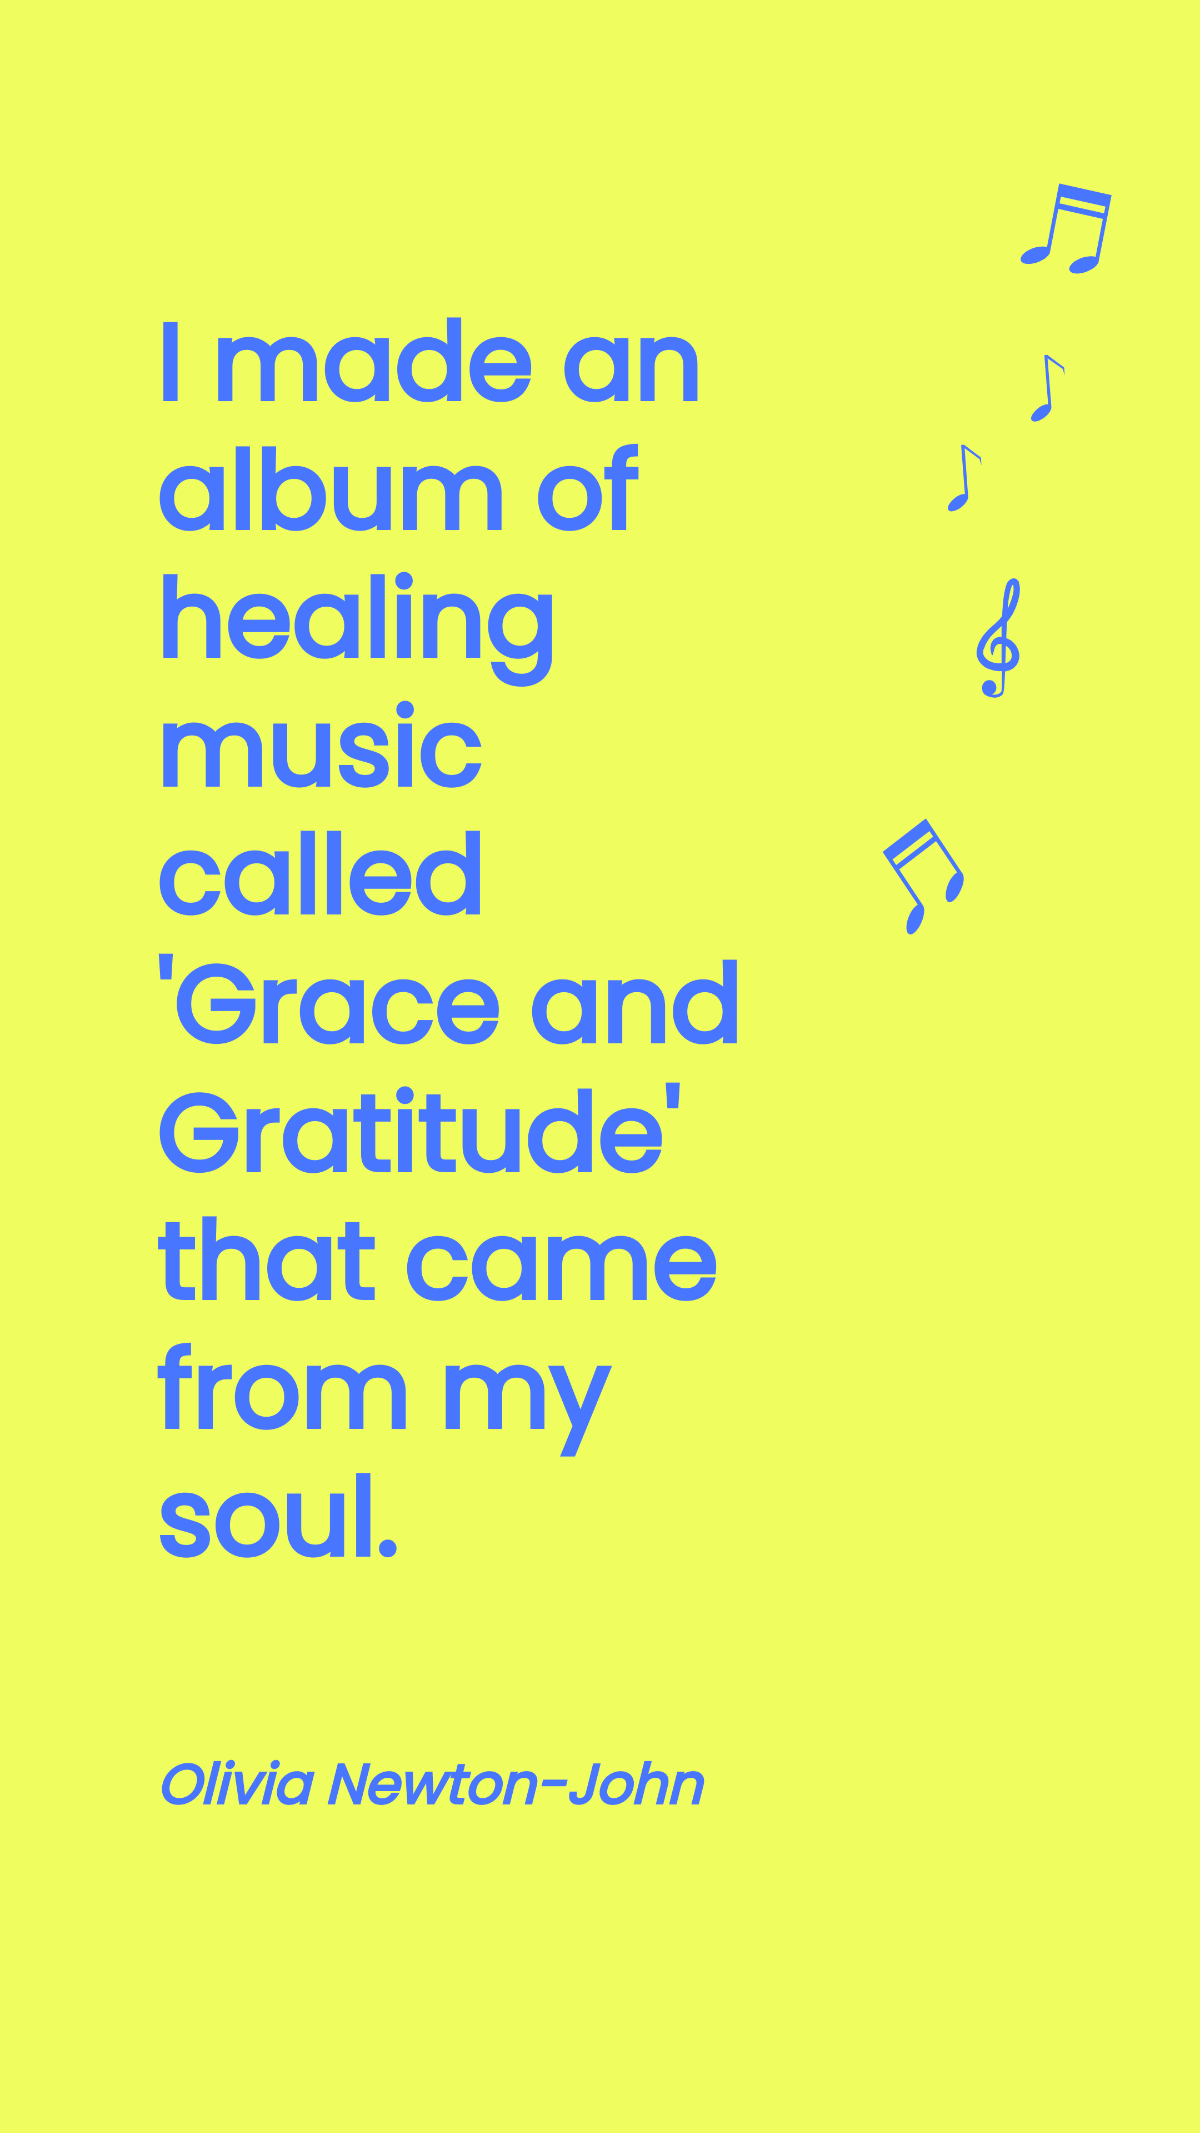 Free Olivia Newton-John - I made an album of healing music called 'Grace and Gratitude' that came from my soul. Template